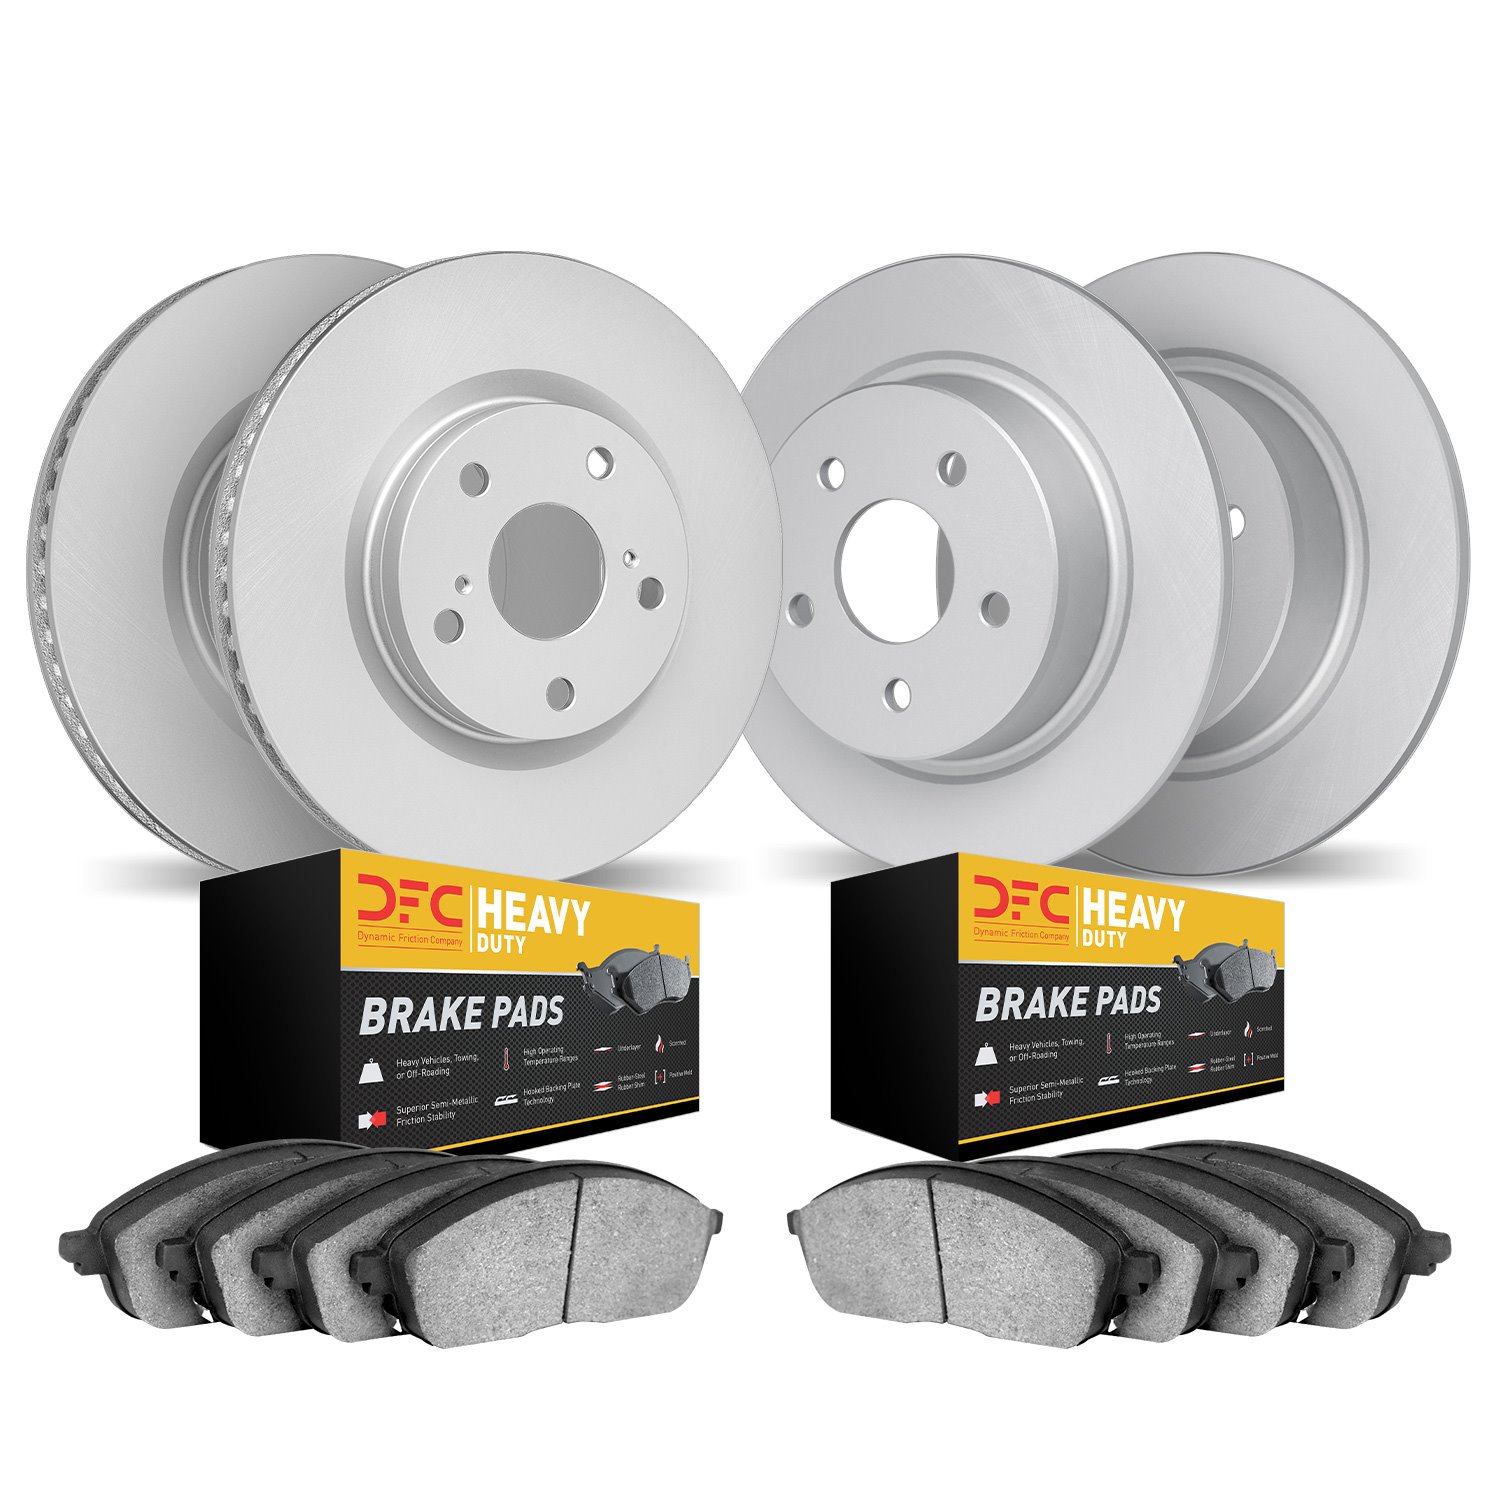 4204-54001 Geospec Brake Rotors w/Heavy-Duty Brake Pads Kit, 2006-2010 Ford/Lincoln/Mercury/Mazda, Position: Front and Rear